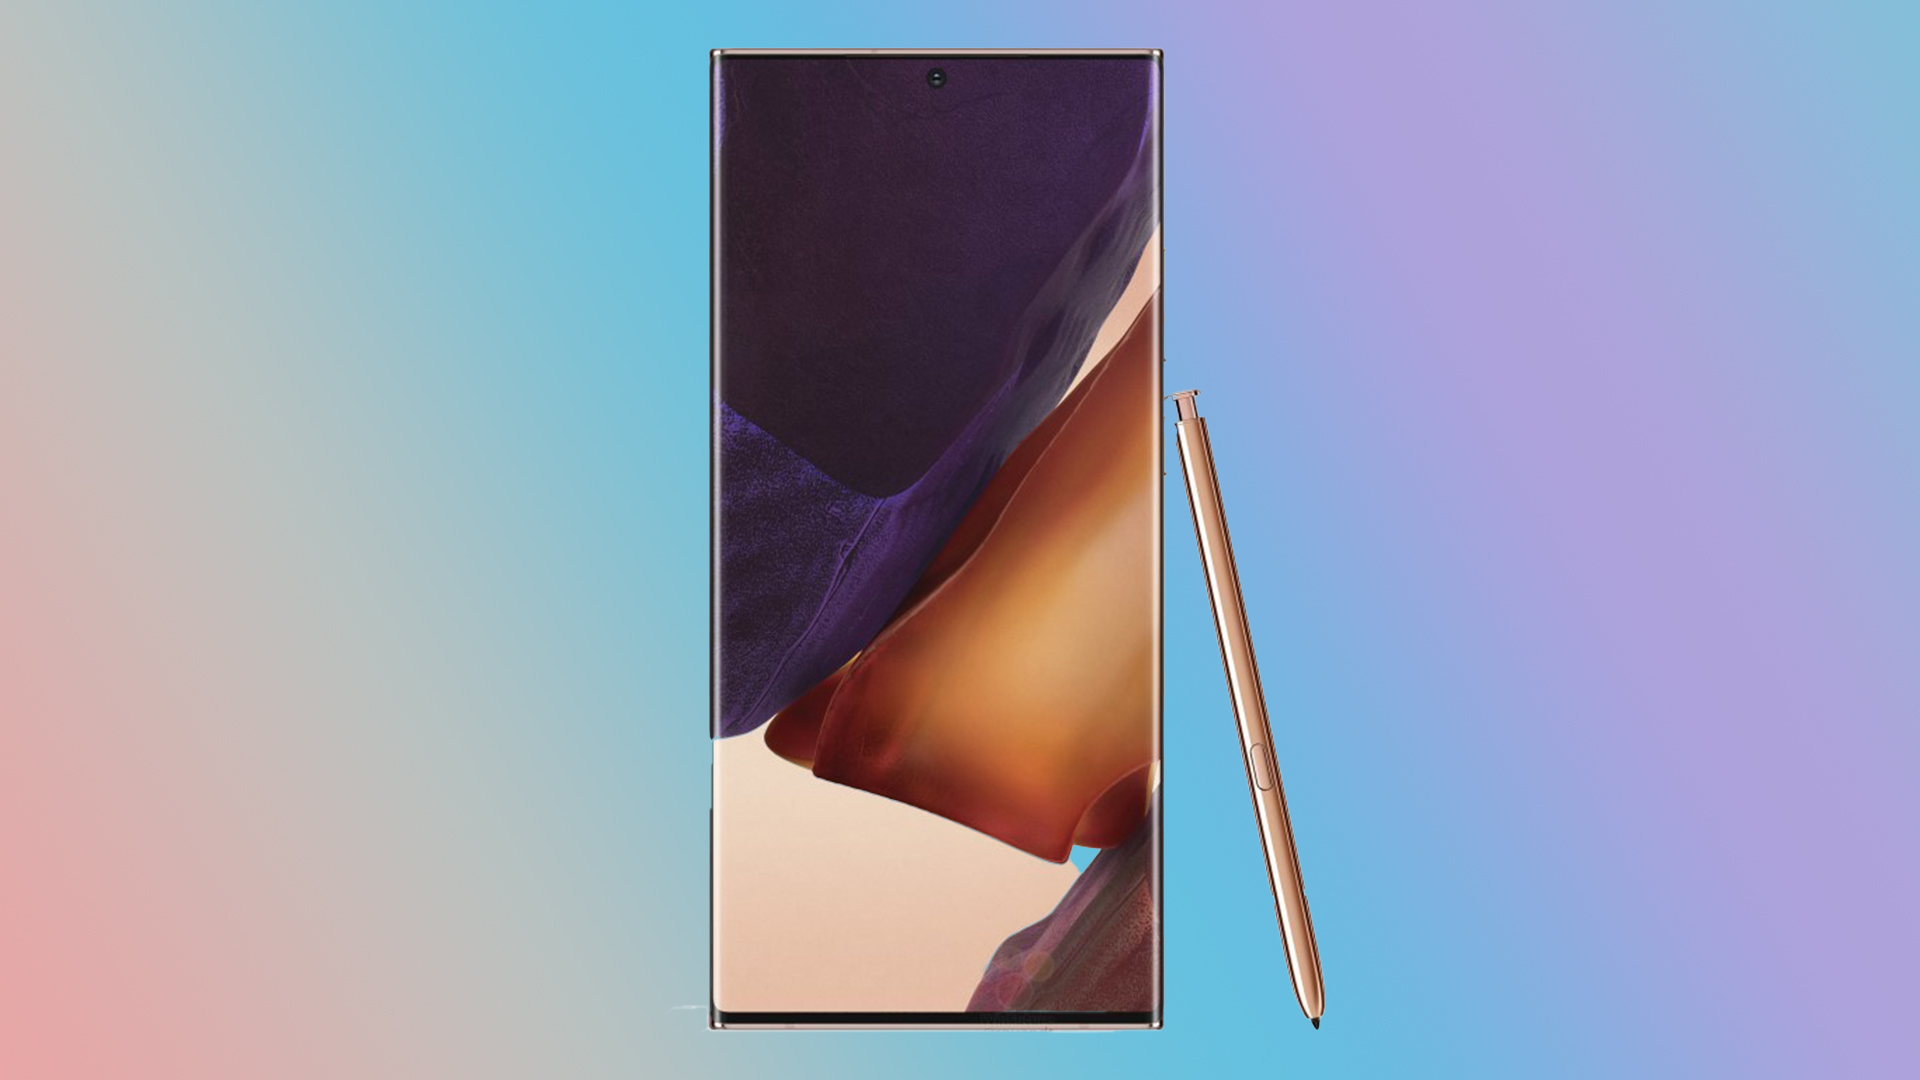 Note 20 and Note 20 Ultra Cutout Wallpapers and Live Wallpapers Collection   XDA Forums